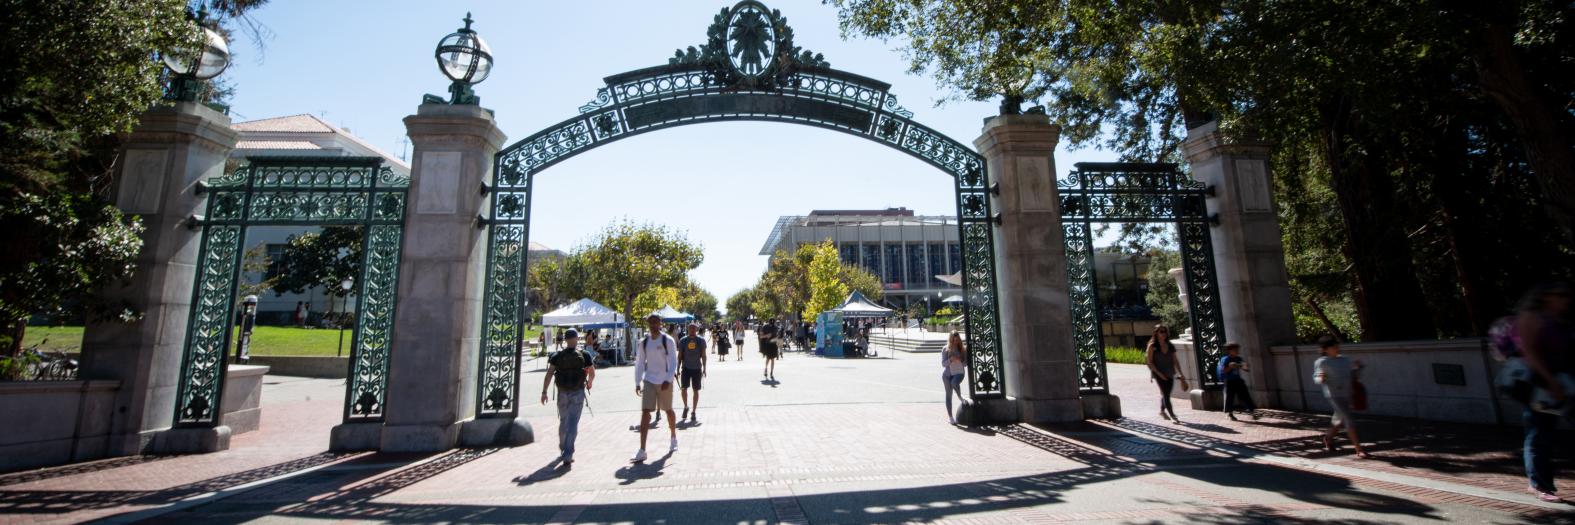 campus scene at Sather Gate